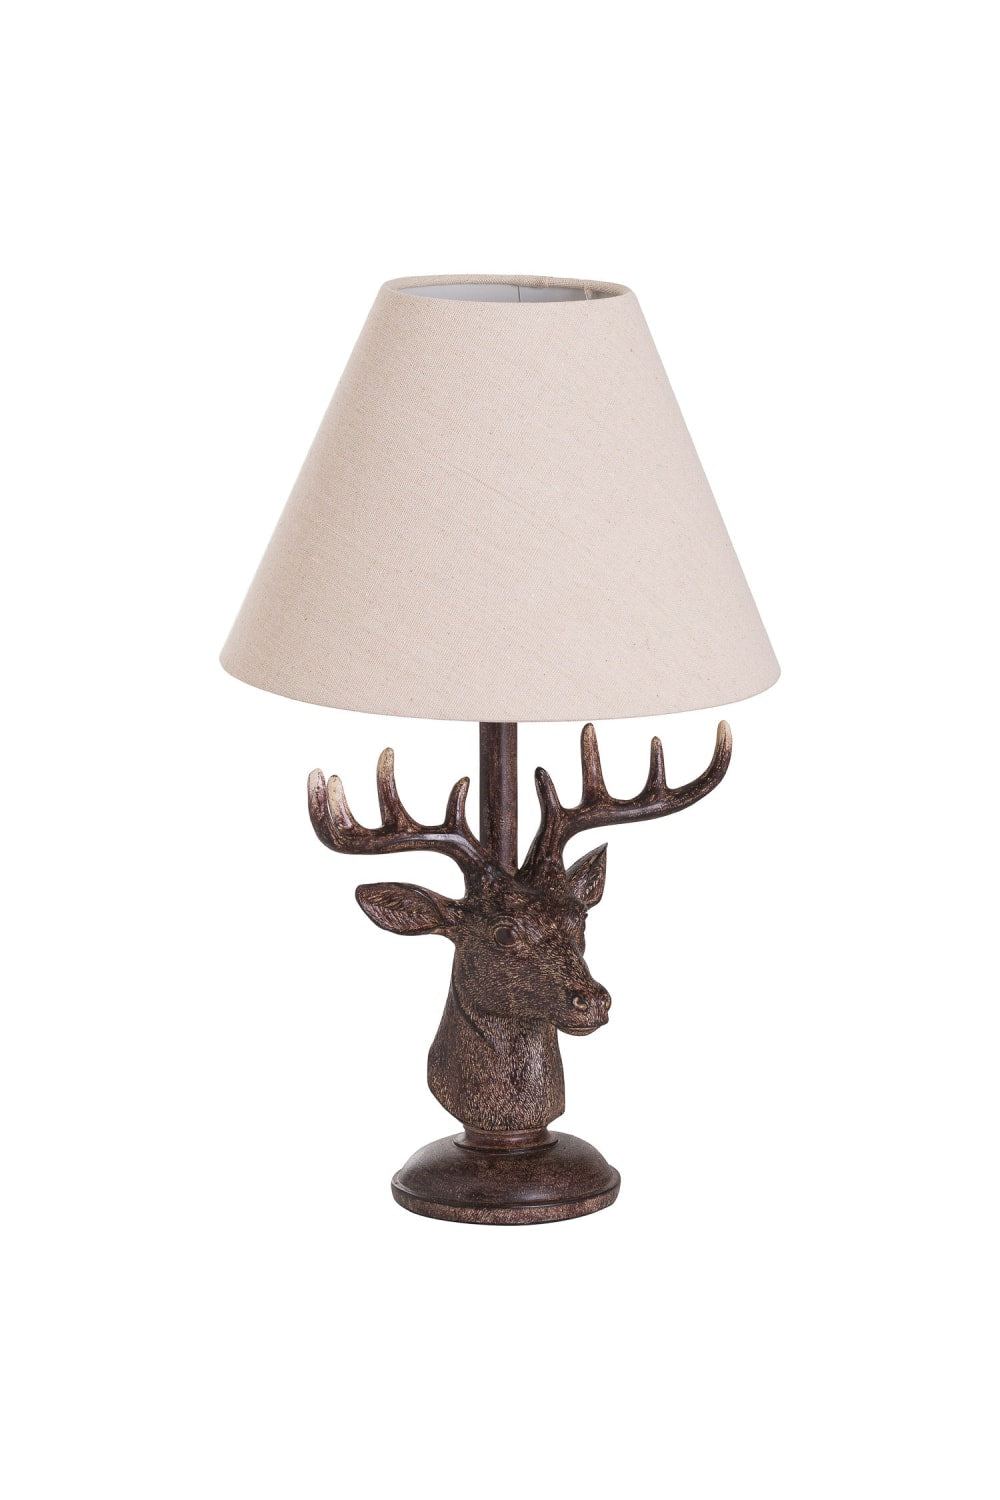 Hill Interiors Stag Table Lamp